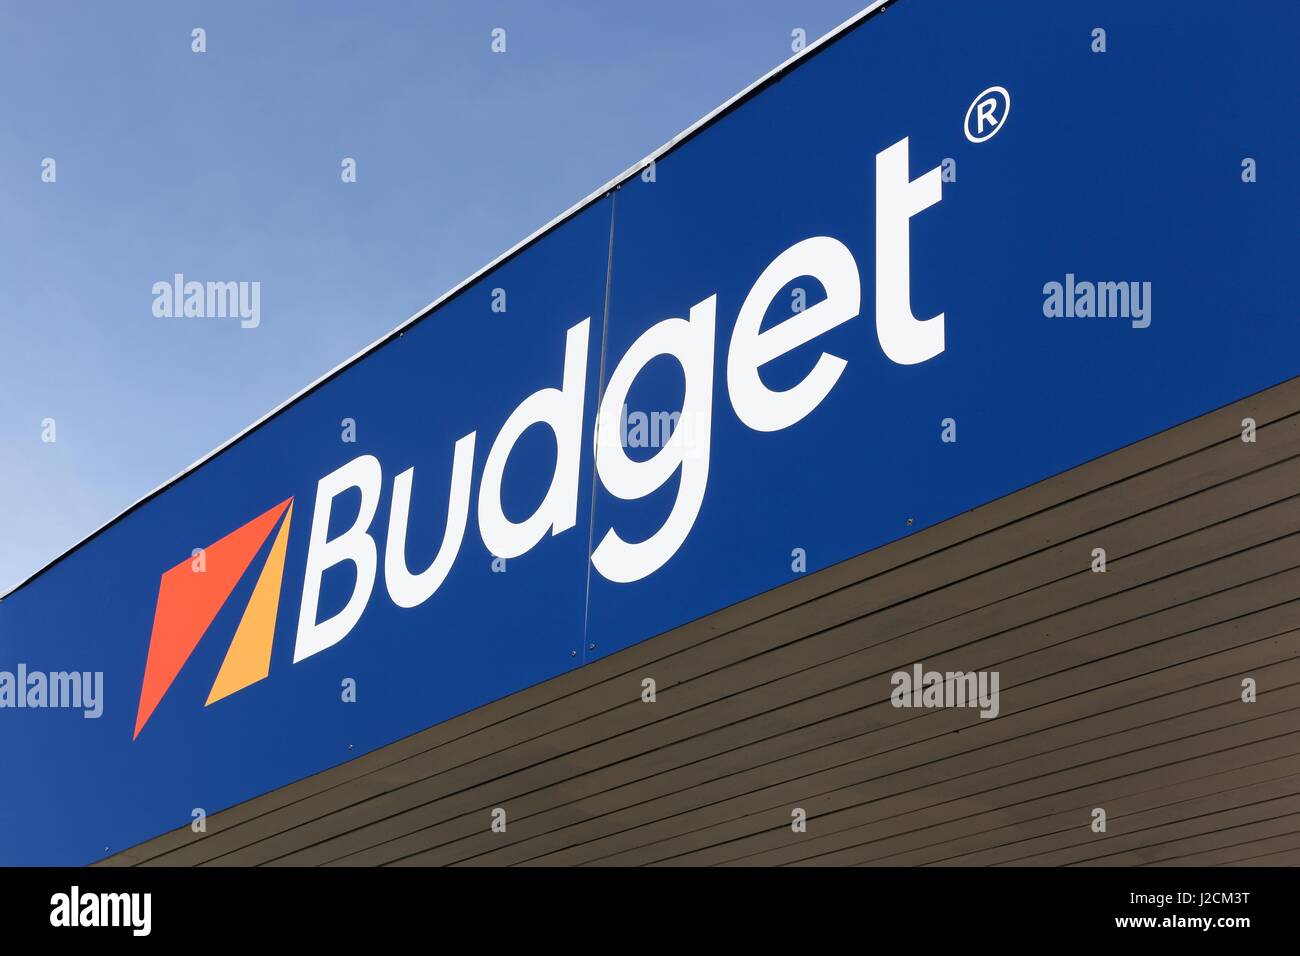 Vejle, Denmark - March 25, 2017: Budget logo on a wall. Budget is an American car rental company that was founded in 1958 in Los Angeles Stock Photo